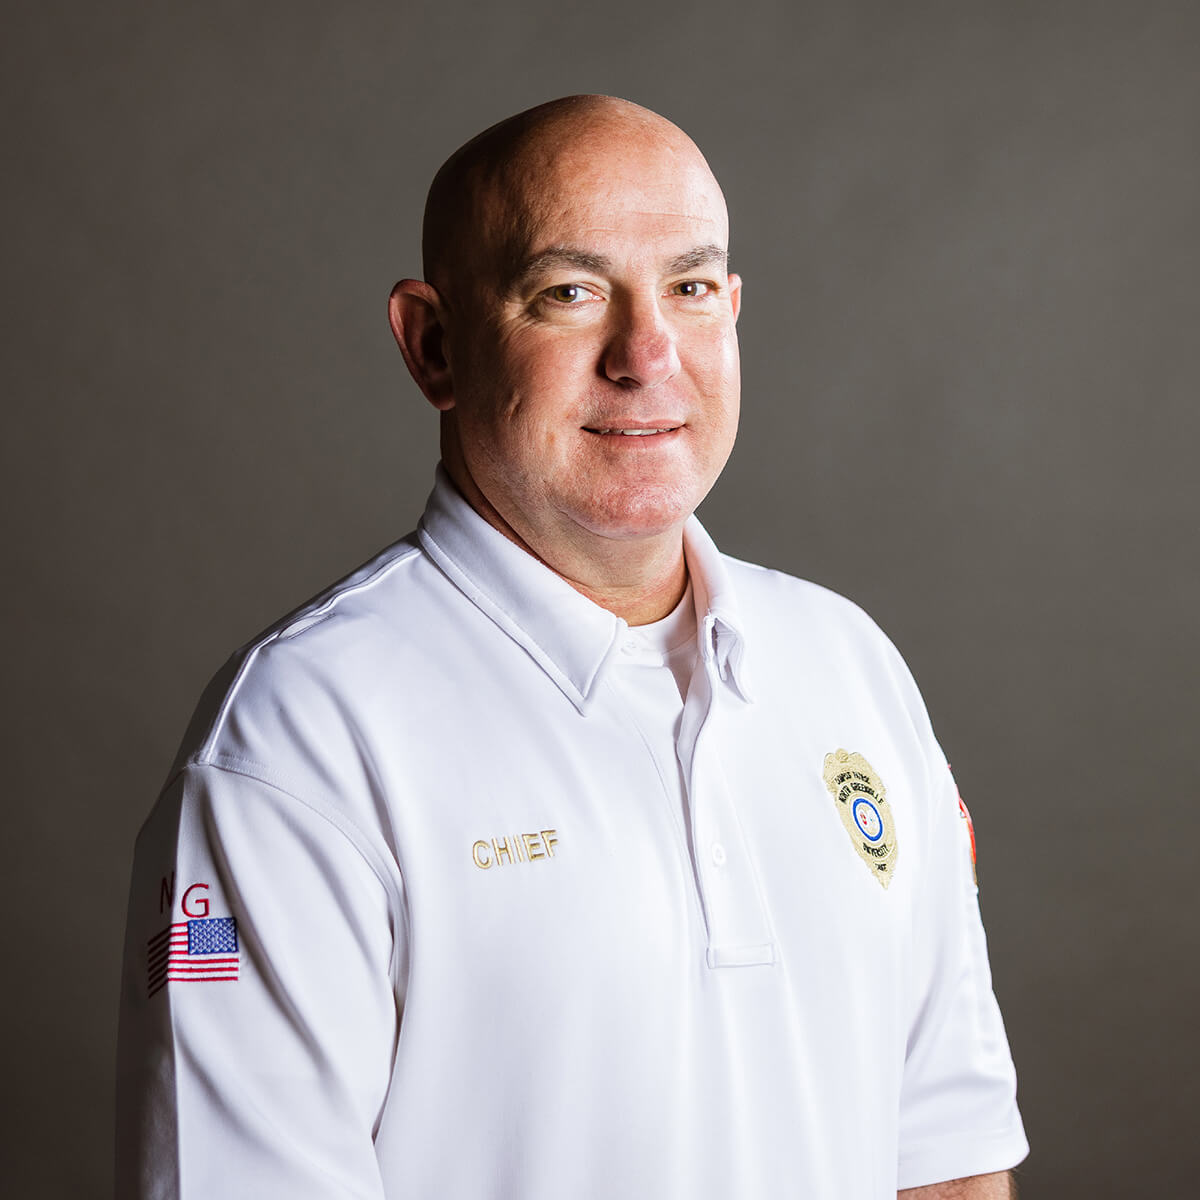 jeff-smith-chief-campus-safety-security